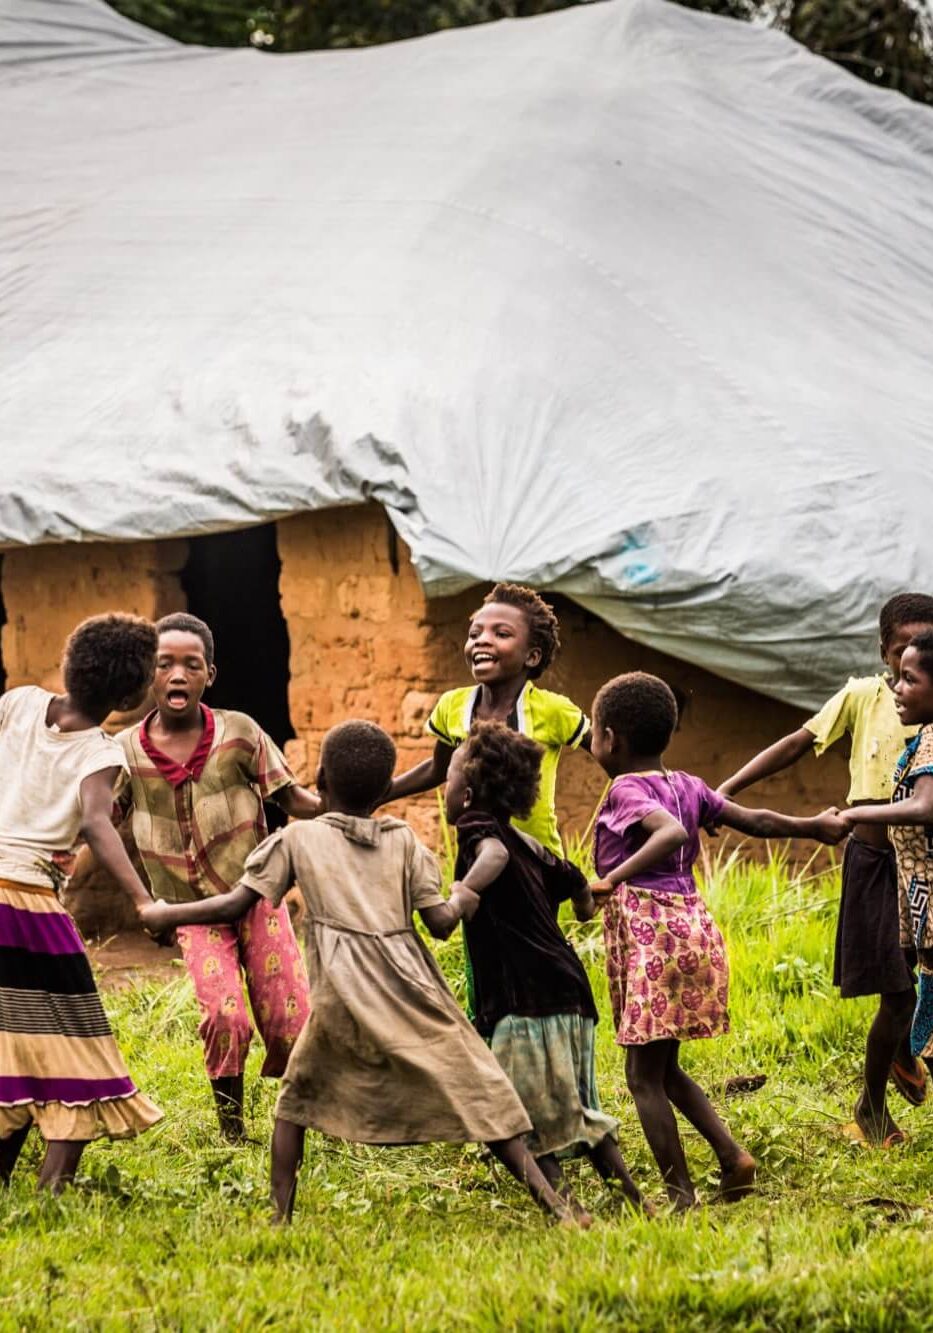 Children play outside of a temporary school set up by UNICEF during a mid-day break, near Mbuji Mayi, Kasaï region, Democratic Republic of the Congo, Saturday 27 January 2018.

The humanitarian situation in the Democratic Republic of the Congo has deteriorated dramatically over the past year. A surge in violent conflict in the Kasaï and Eastern regions has forced many people from their homes, including in the Kasaï region. UNICEF has scaled up integrated health, water, sanitation and hygiene (WASH), nutrition, education, protection in the country, with a focus on the Kasaï and Eastern regions.